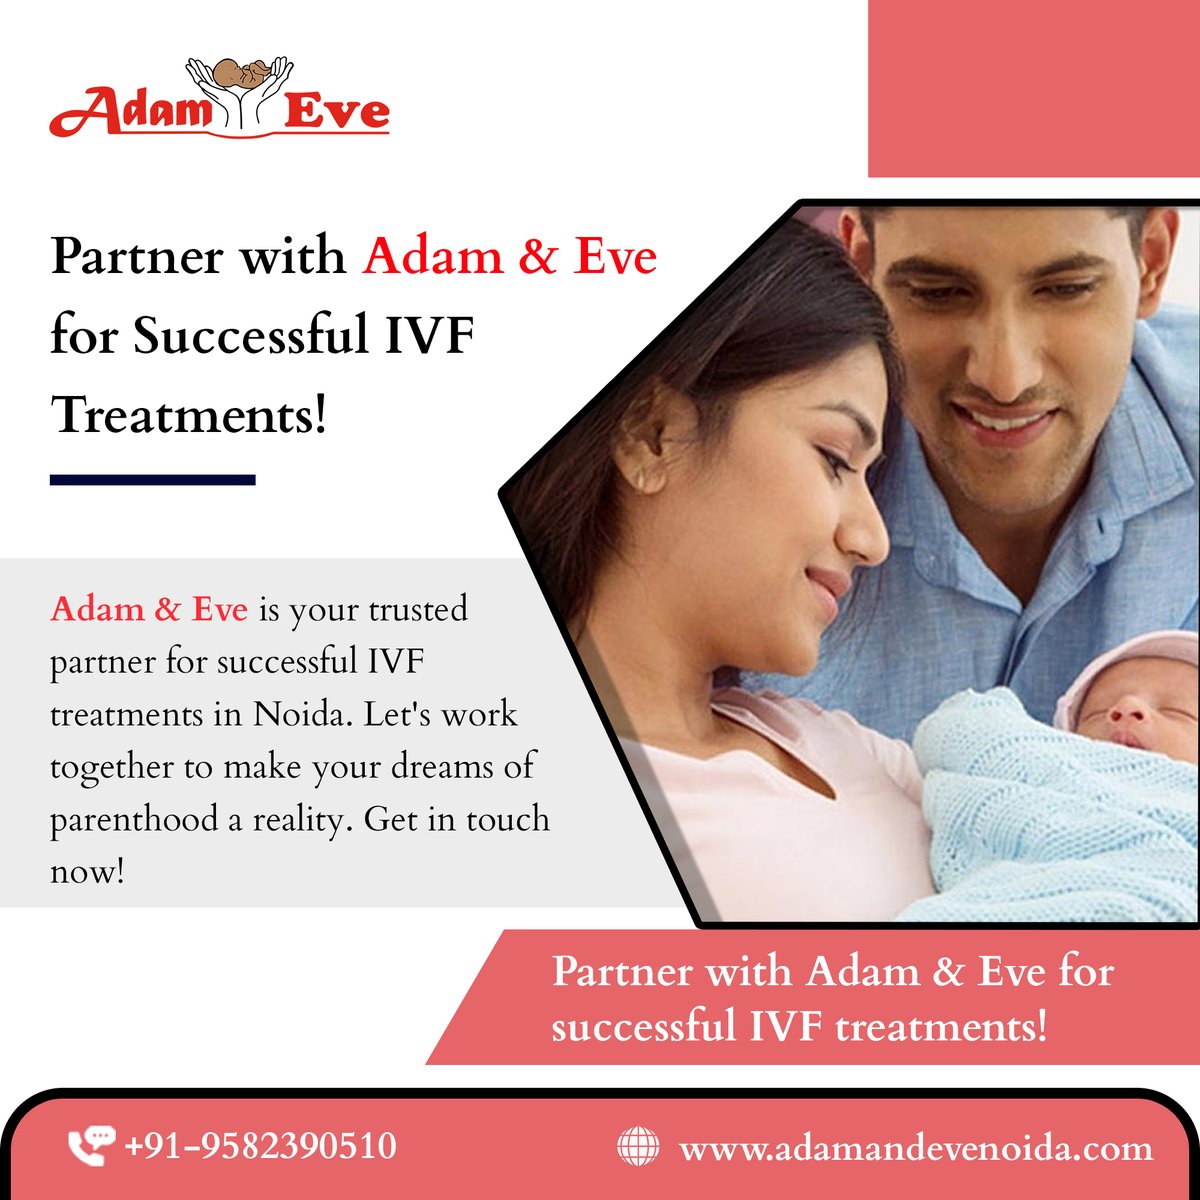 Considering IVF in Noida?Look no further than Adam and Eve! Schedule a consultation today and let's start your journey! 
𝗕𝗼𝗼𝗸 𝗬𝗼𝘂𝗿 𝗙𝗶𝗿𝘀𝘁 𝗙𝗿𝗲𝗲 𝗔𝗽𝗽𝗼𝗶𝗻𝘁𝗺𝗲𝗻𝘁: 
𝗖𝗮𝗹𝗹 +𝟵𝟭-𝟳𝟲𝟲𝟵𝟴𝟬𝟱𝟲𝟬𝟬 
#IVF #NoidaFertility #MakingDreamsComeTrue #AdamandEveNoida